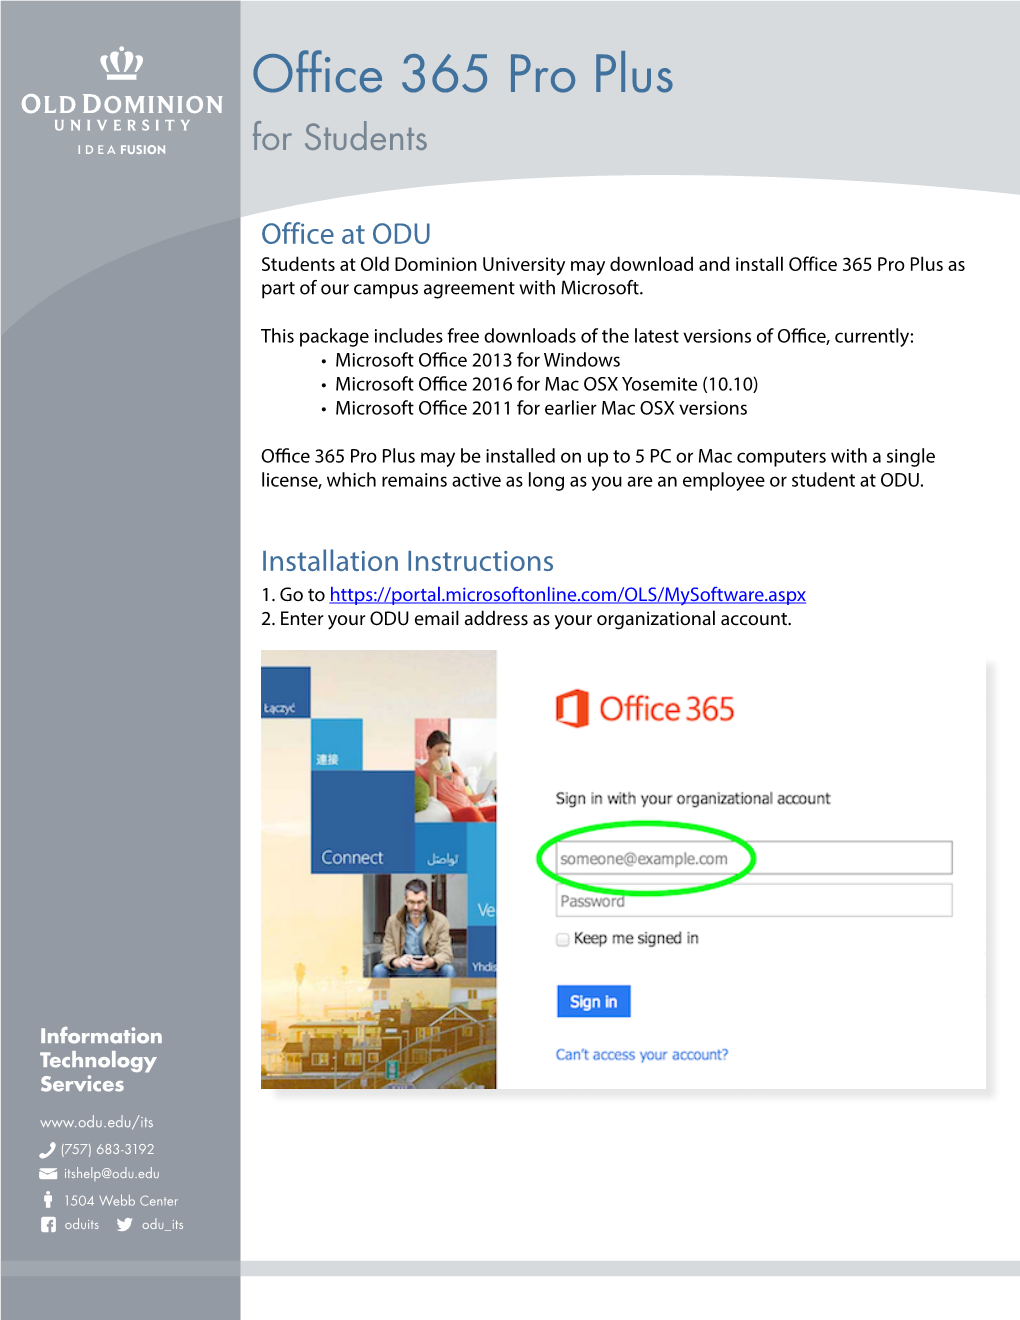 Office 365 Pro Plus for Students